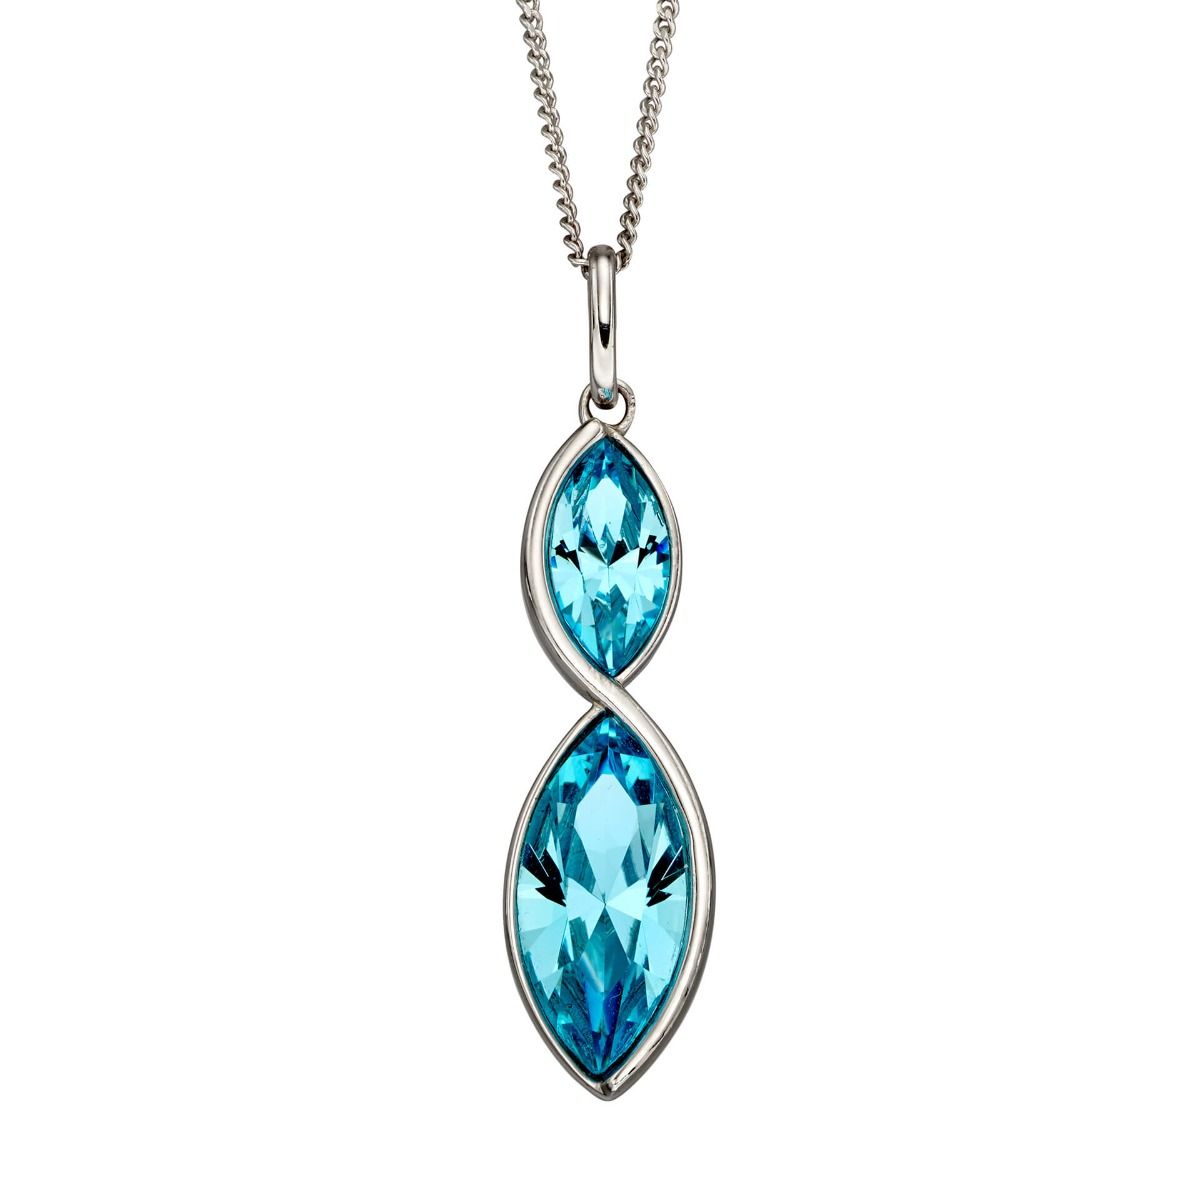 Fiorelli blue marquise shaped crystal necklace